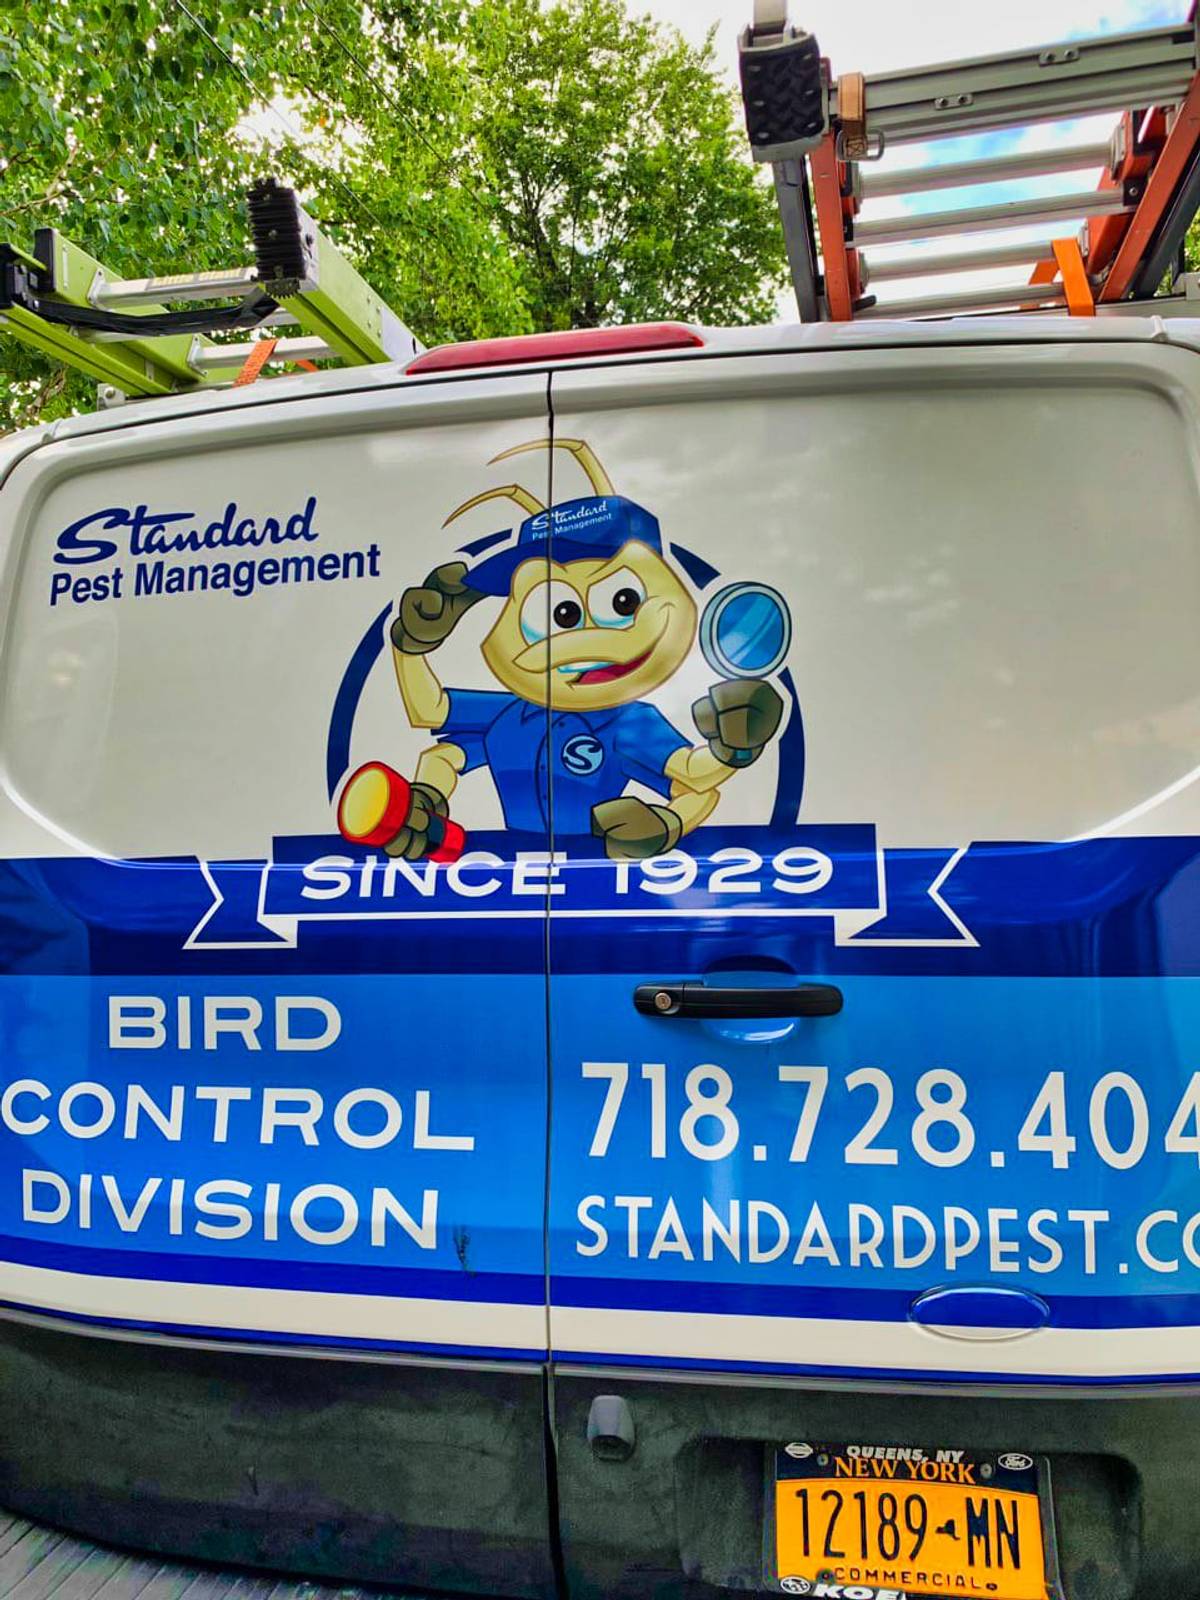 Rear view of Standard Pest Company Vehicle